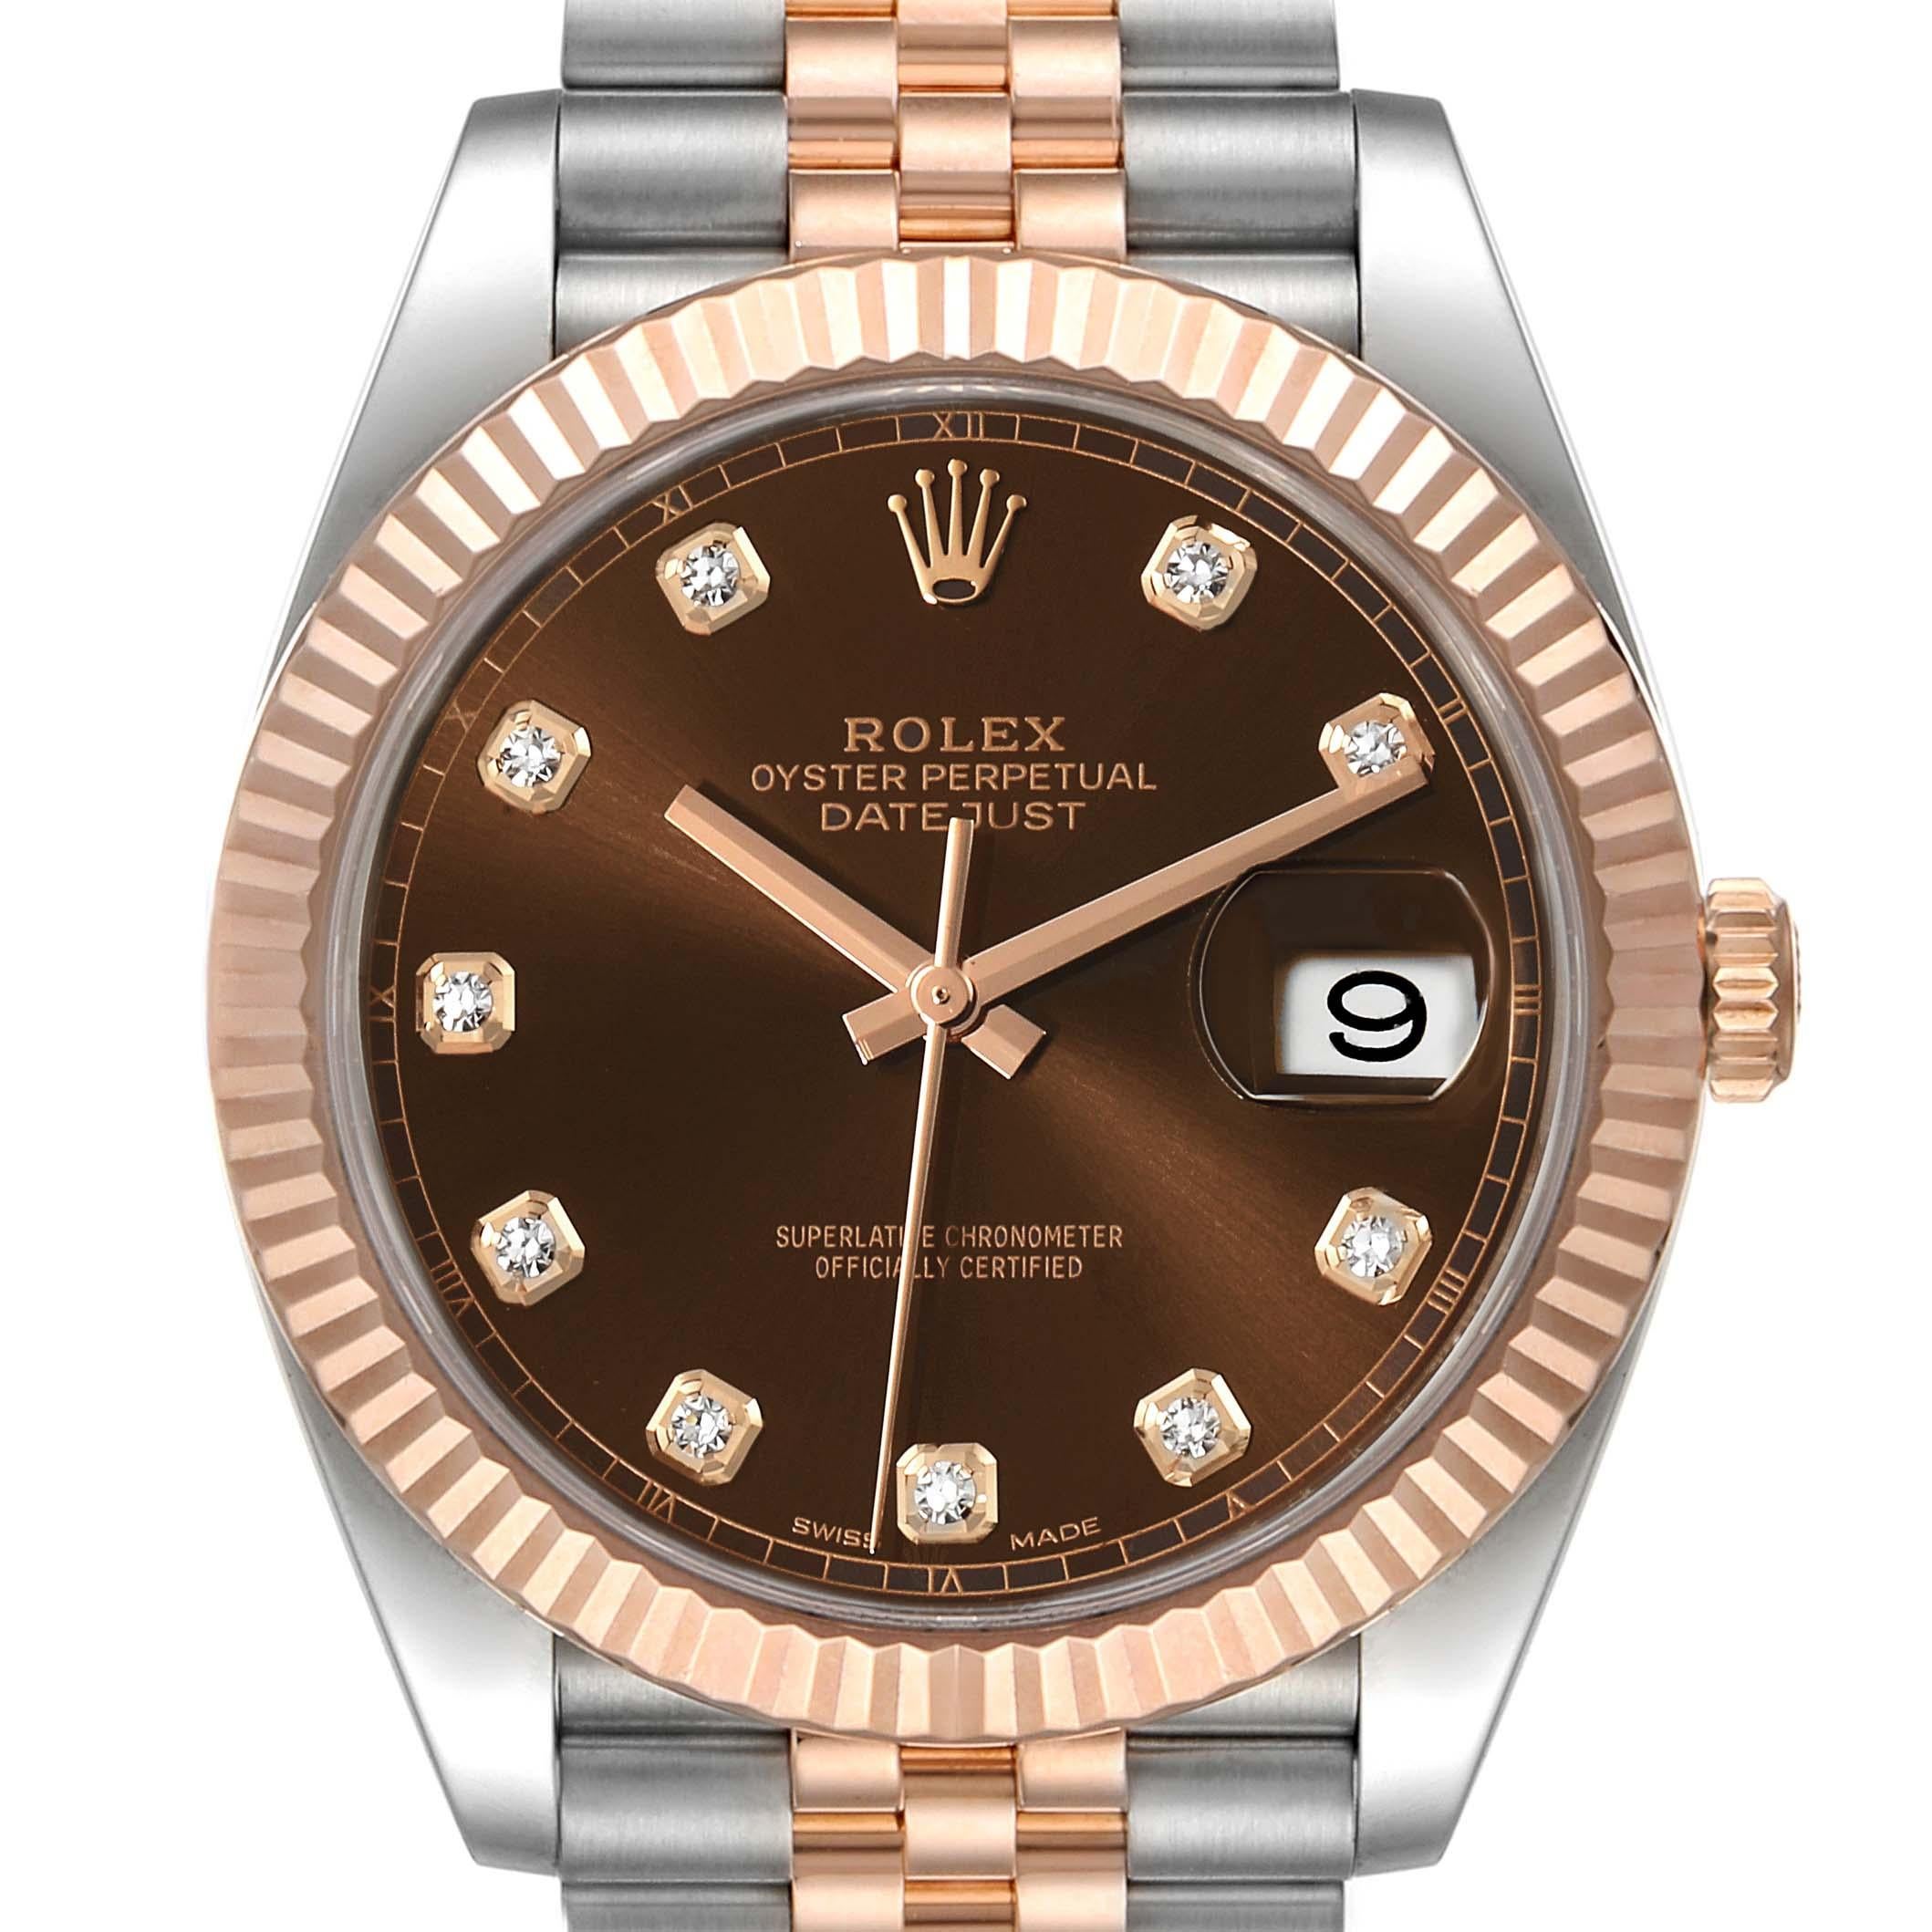 Stainless steel case with a stainless steel Rolex jubilee bracelet with 18kt everose gold center links. Fixed fluted 18kt everose gold bezel. Chocolate dial with rose gold hands and diamond / small Roman numeral hour markers. Minute markers around